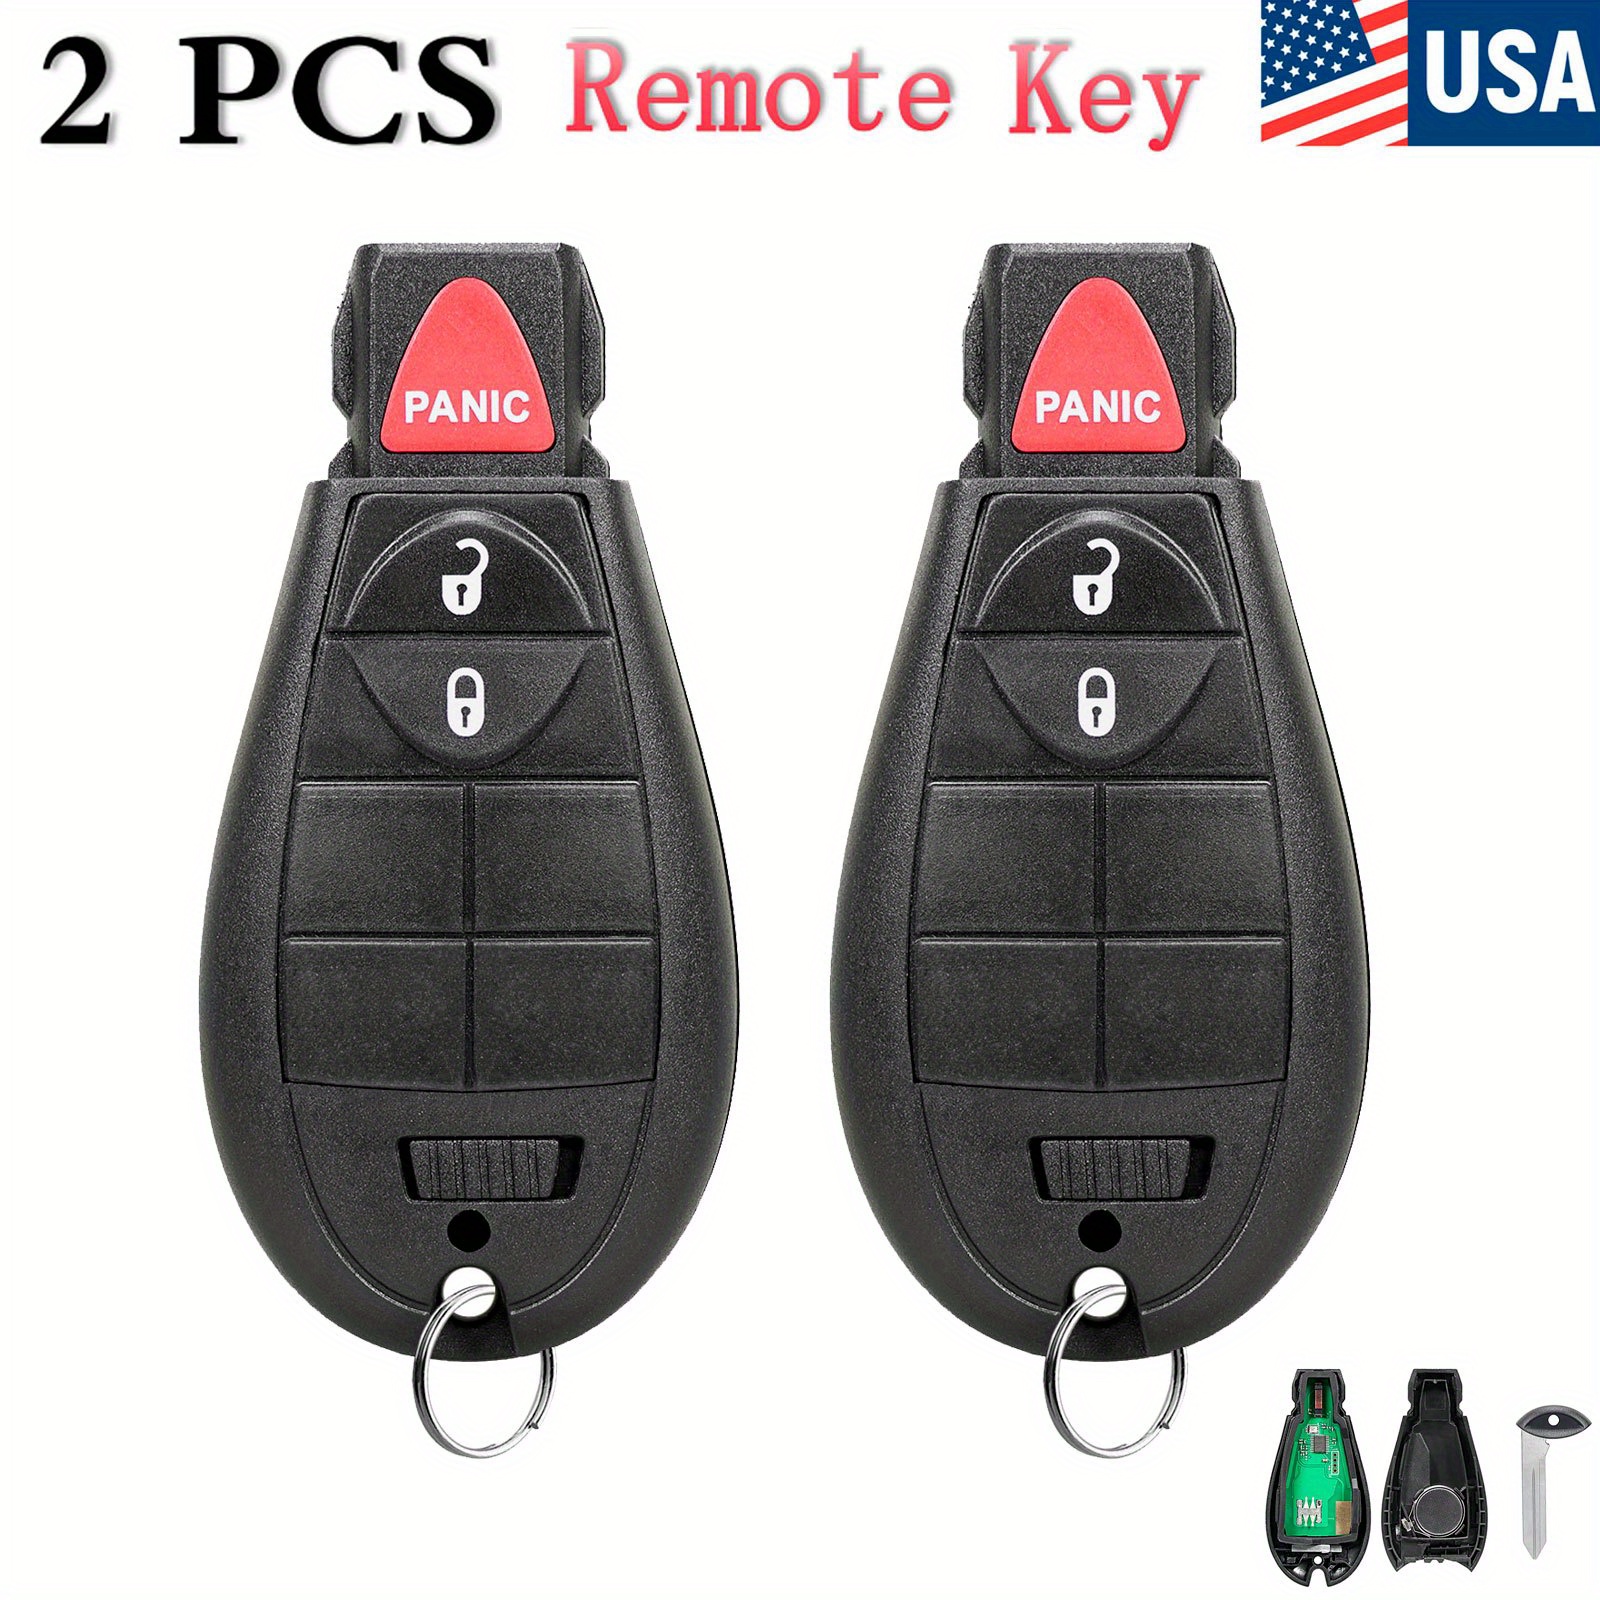 

2pcs 433 Mhz Remote Car Key Fob 3 Buttons For Dodge For Ram For 1500 For 2500 For 3500 For Fcc Id Gq4-53t